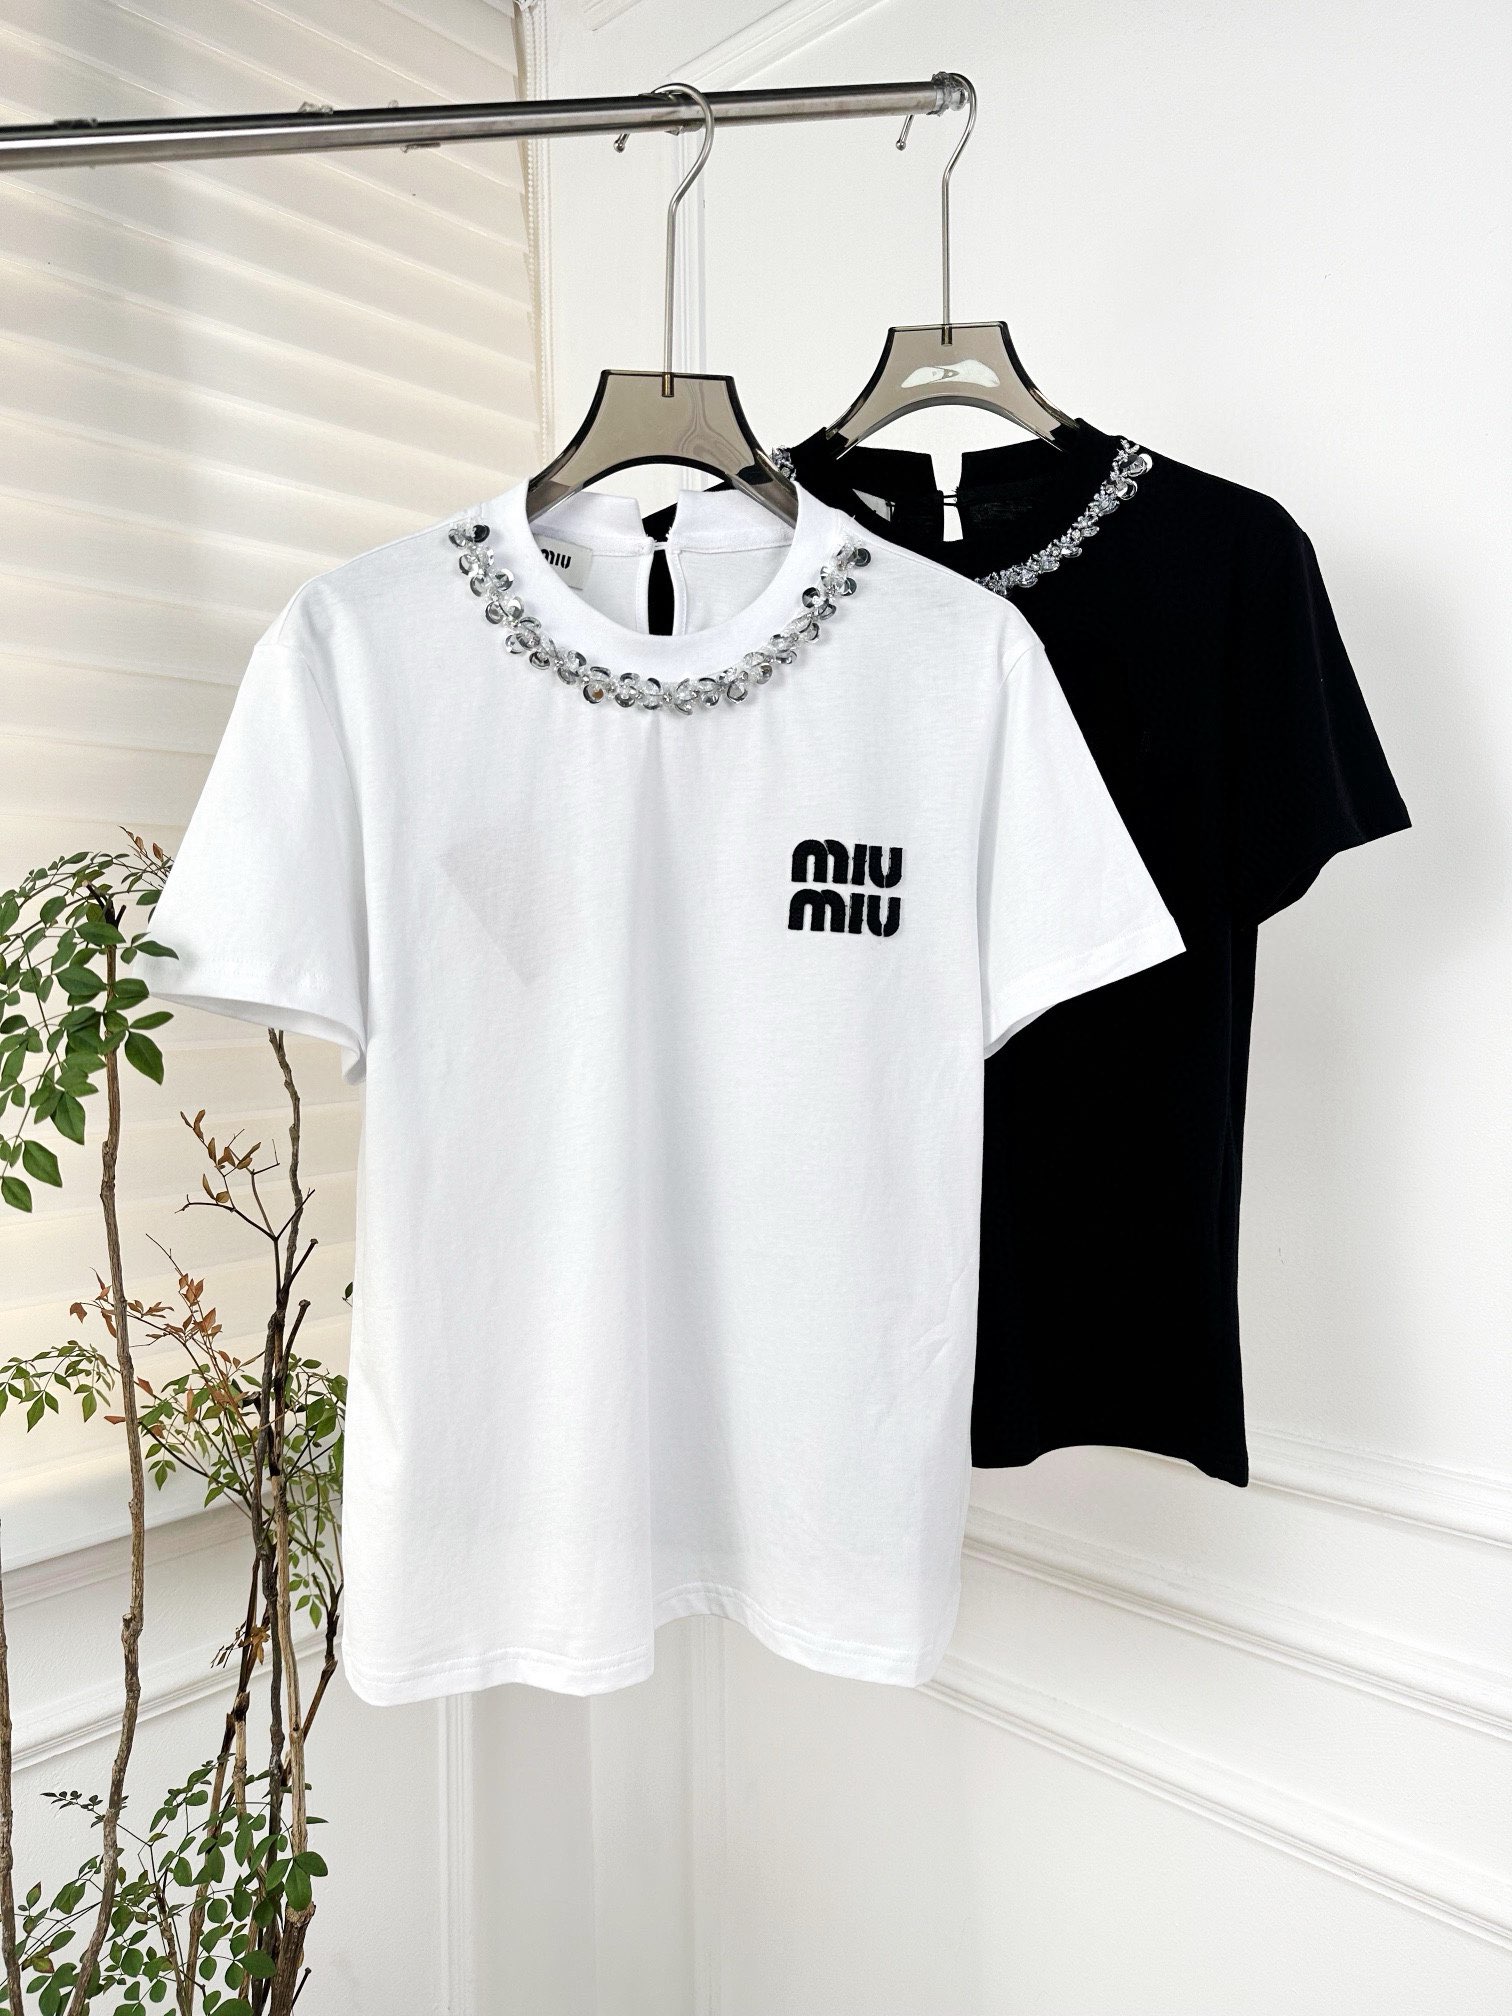 MiuMiu Clothing T-Shirt Black White Embroidery Spring Collection Short Sleeve SML838170